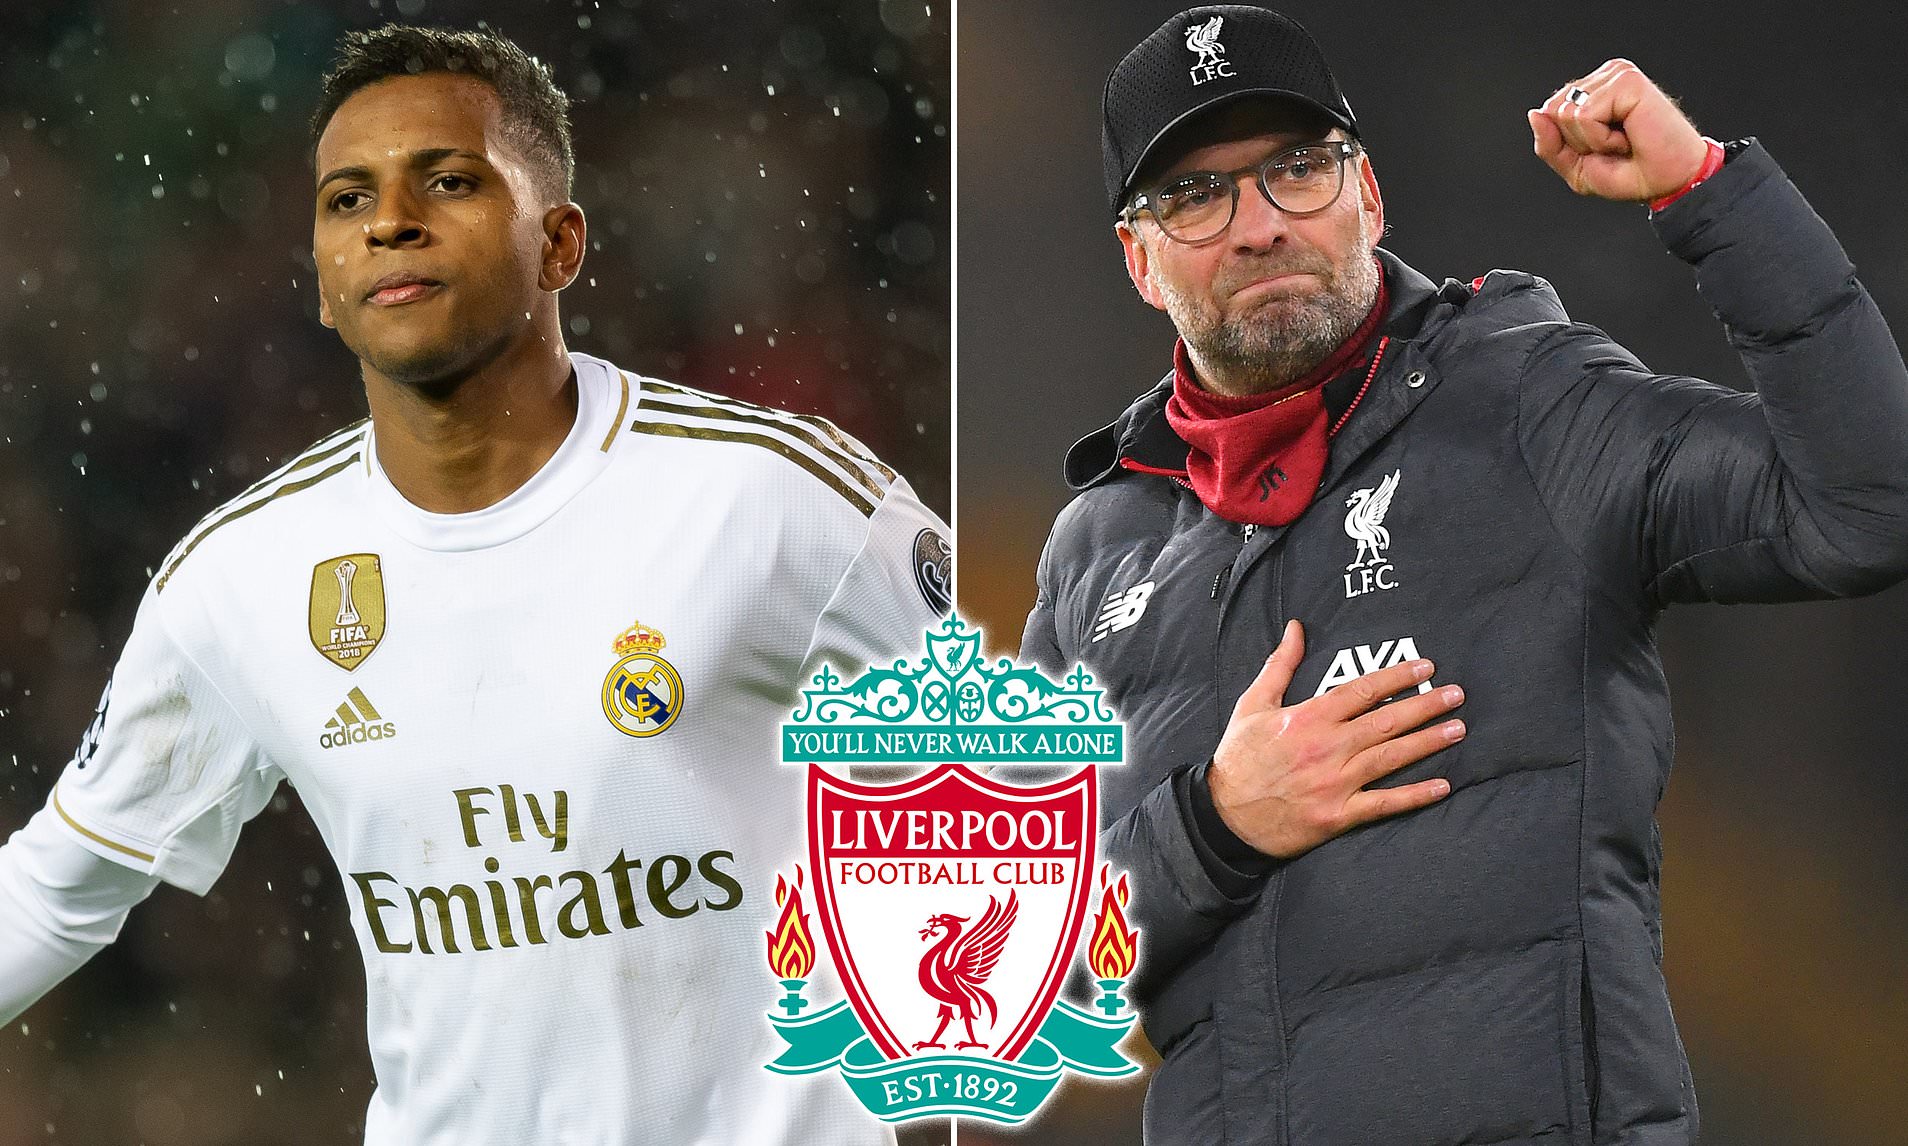 Liverpool's Bold €80 Million Move for Rodrygo: An Era of Change at Anfield